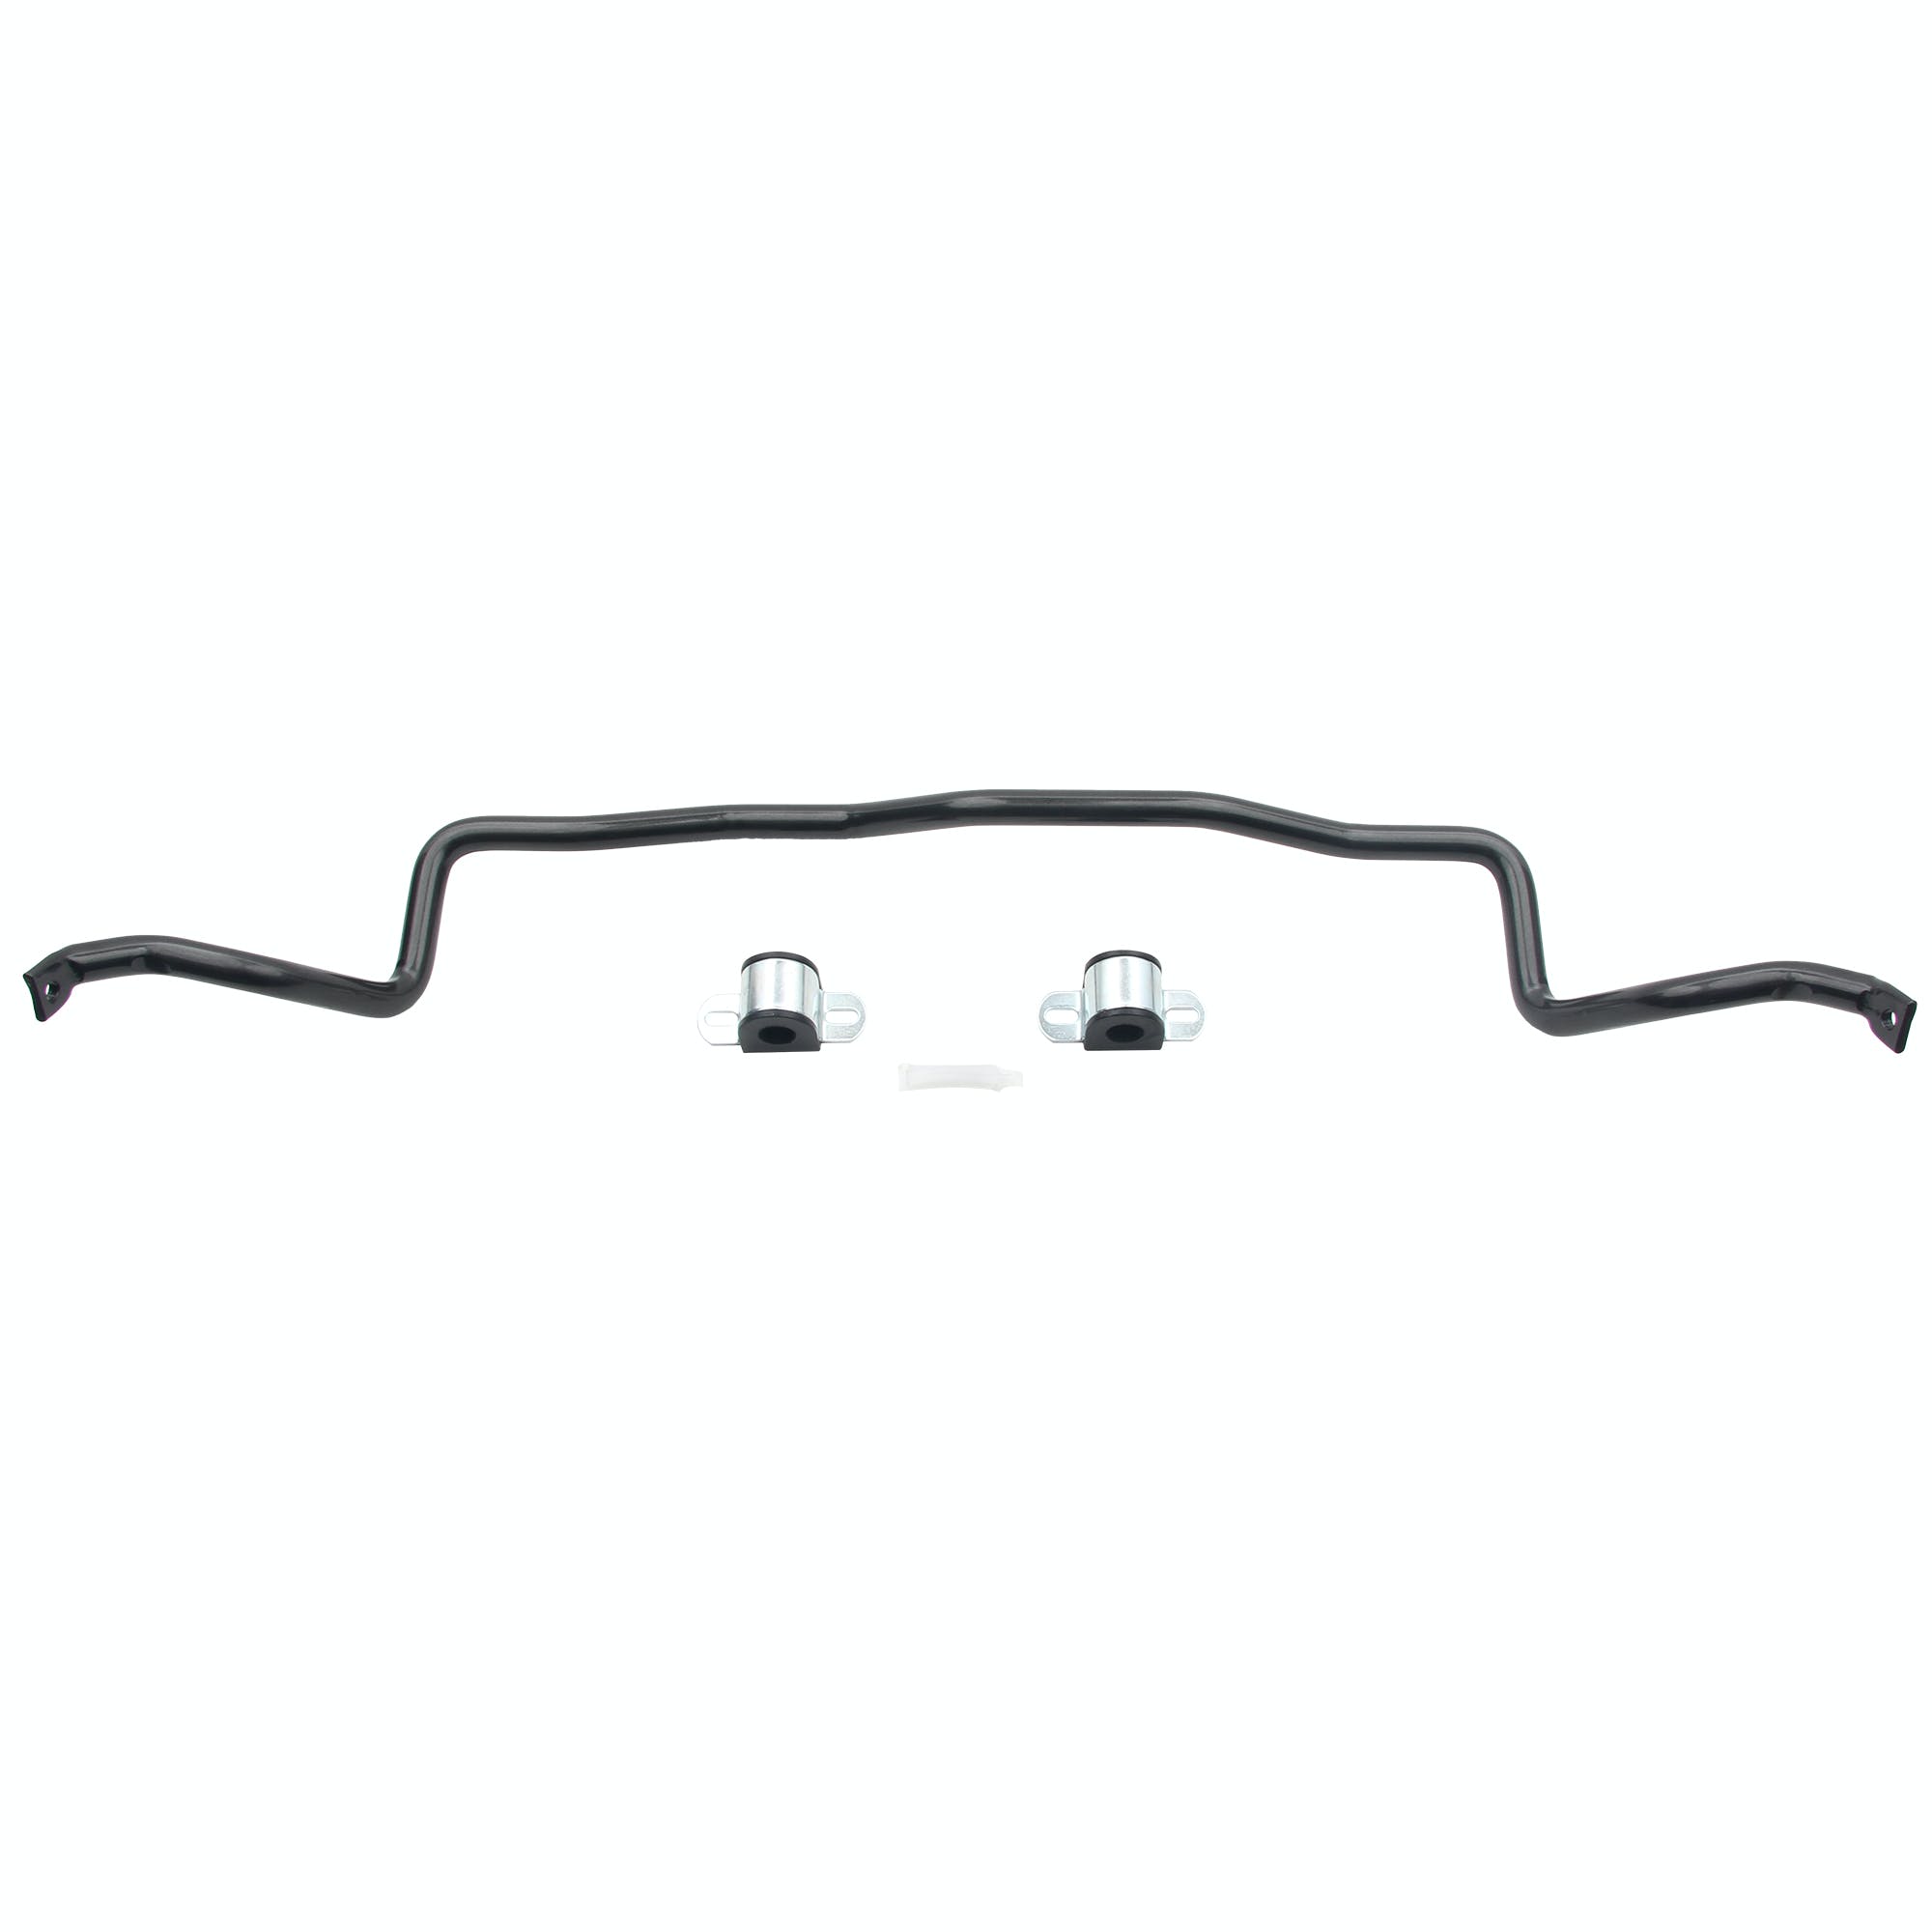 ST Suspensions 50208 Front Anti-Swaybar